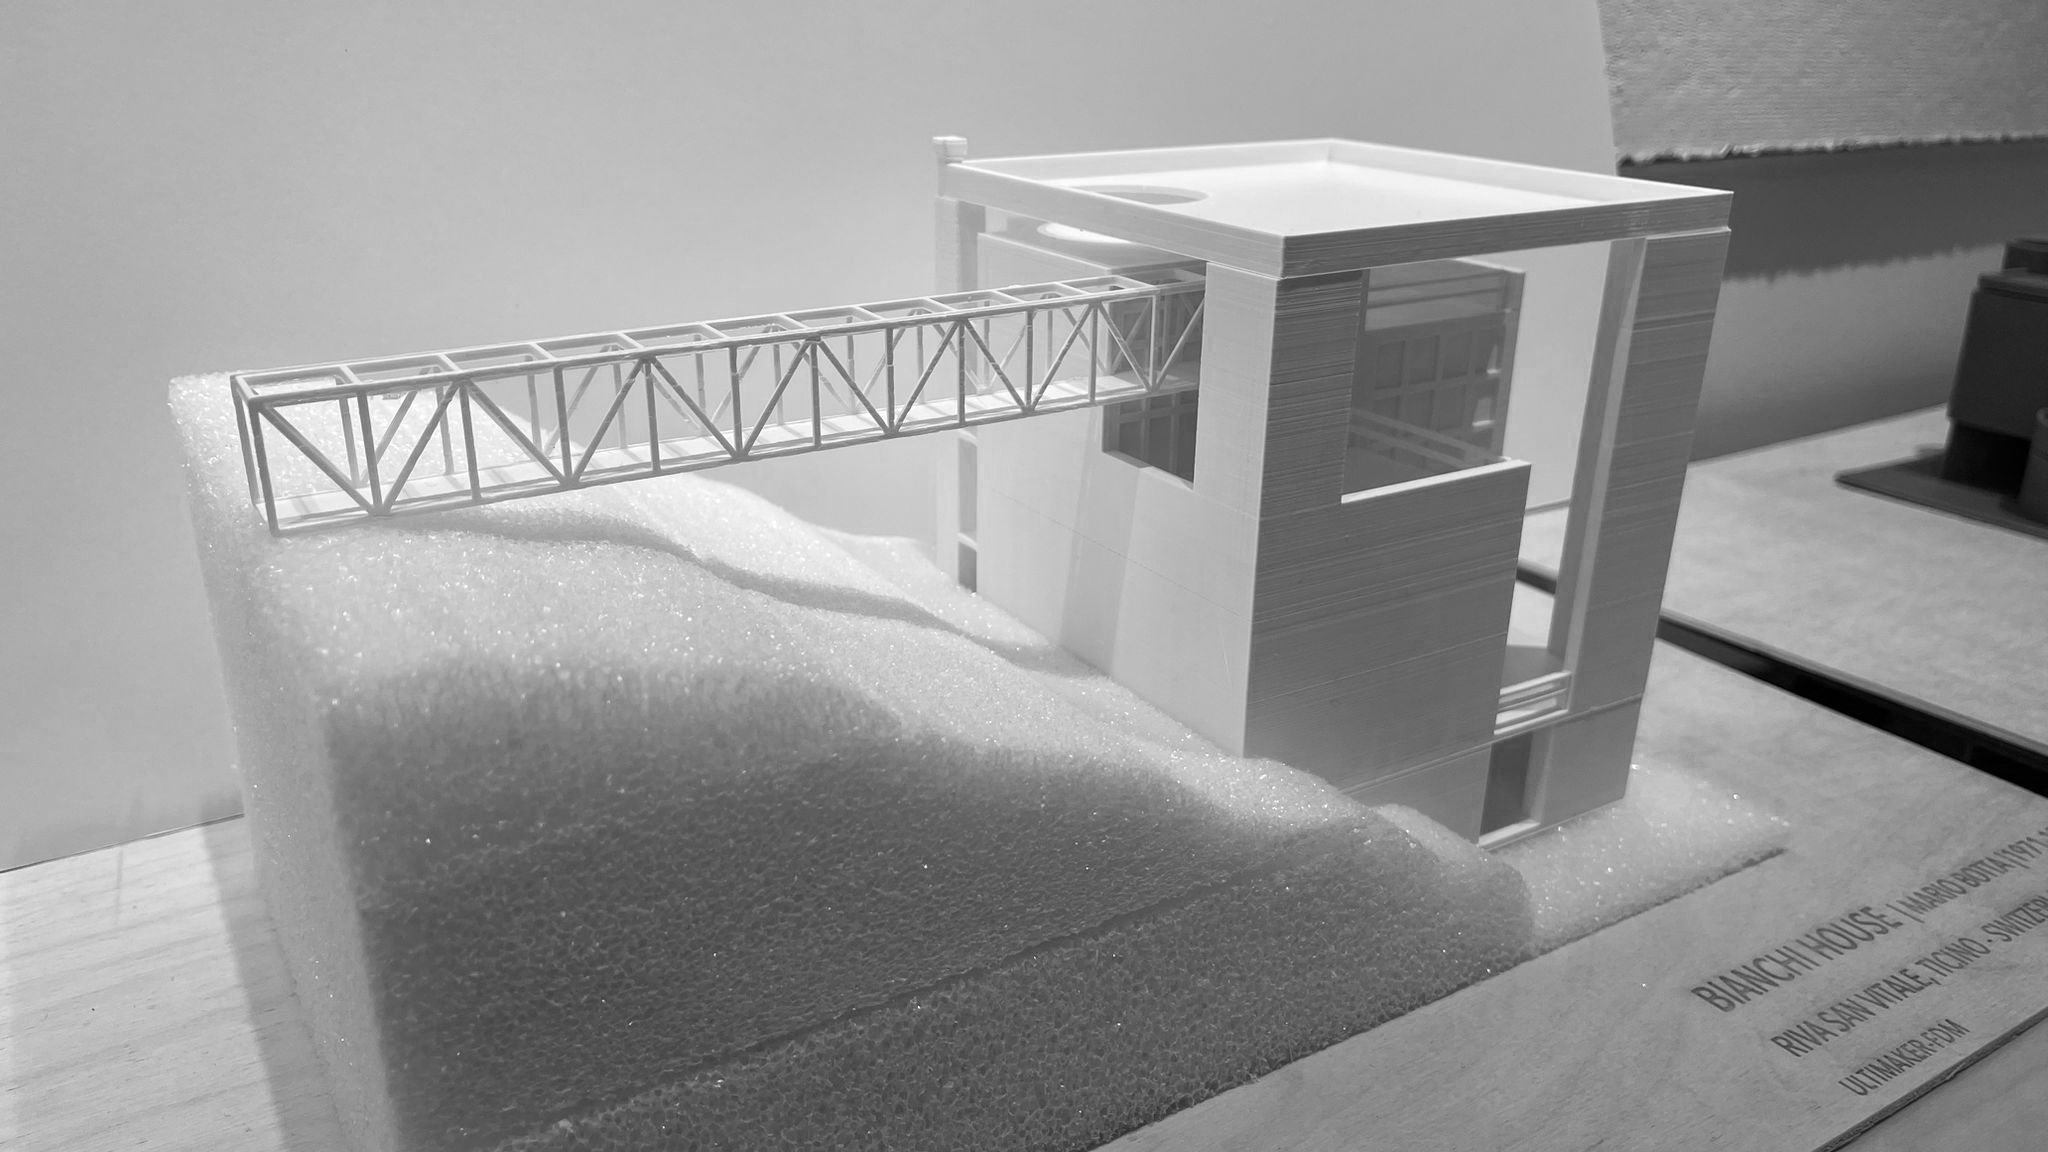 An image of the entry face of a model of a building